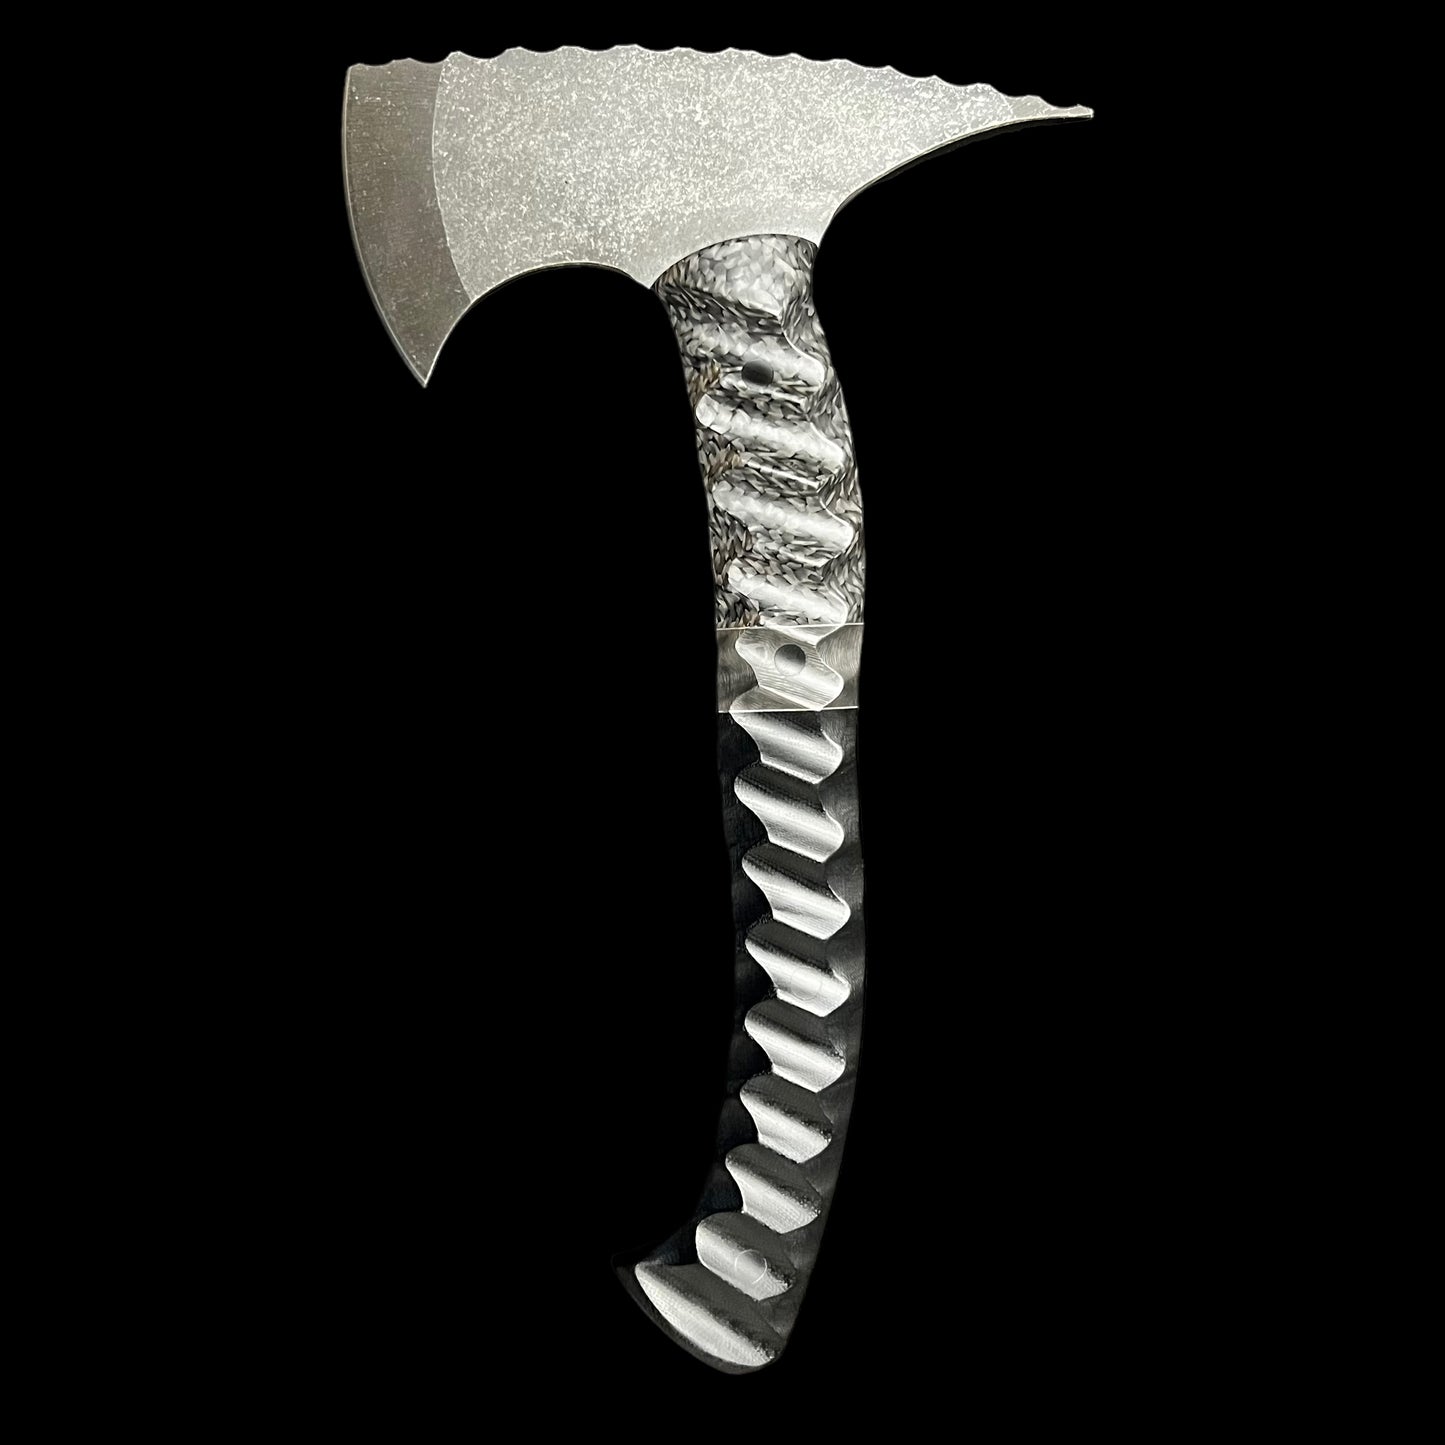 Crash Axe- Carbon Fiber/ Stainless Steel/ Marbled Carbon Fiber/ Black G10. Pins- Carbon Fiber.